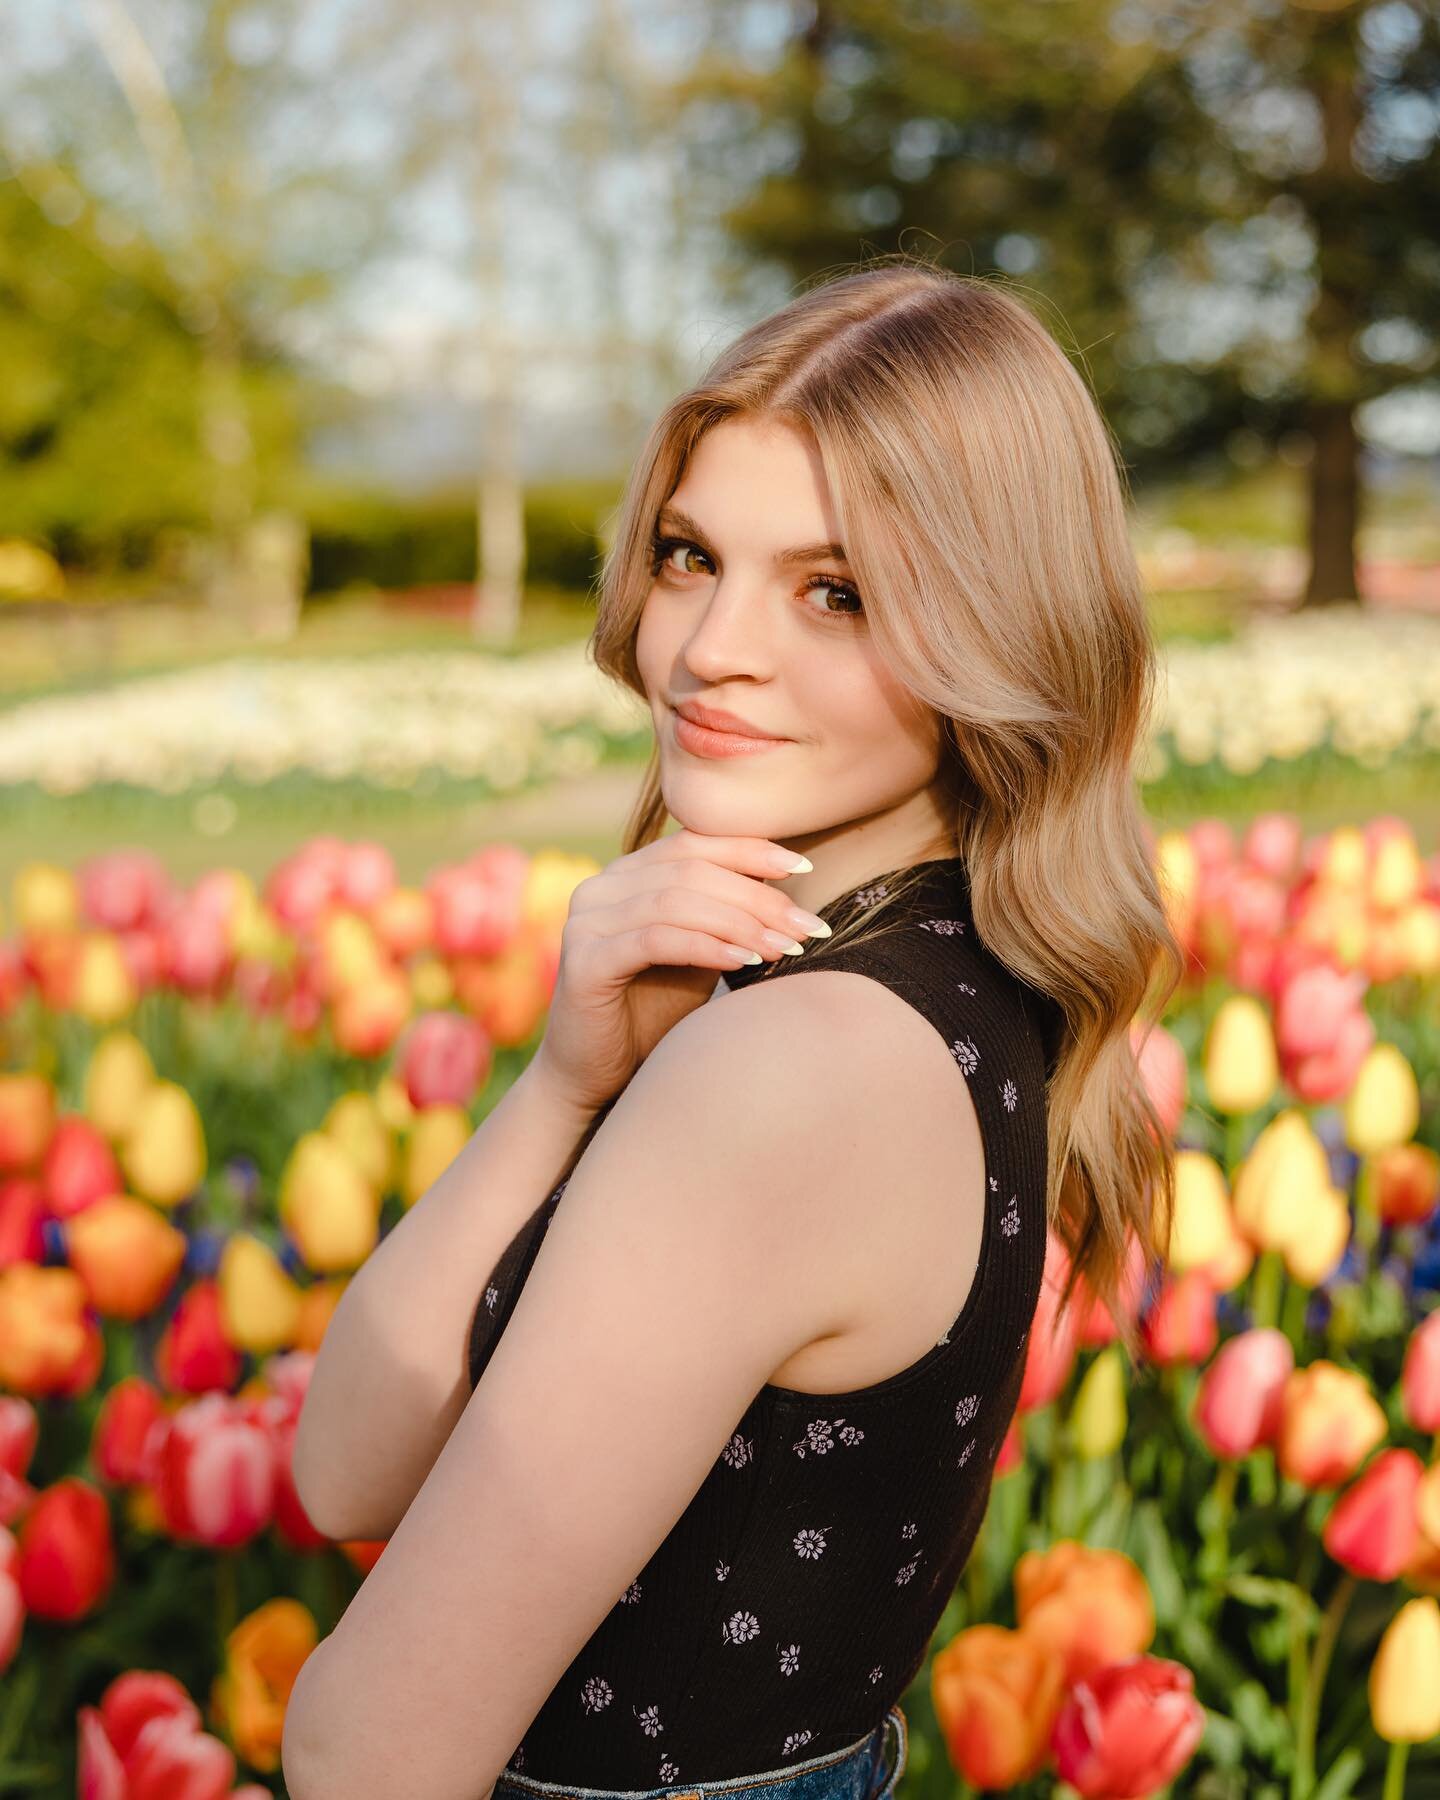 My first senior session at a tulip festival 🌷 Brighten knew right away what she envisioned for her senior photos &amp; I&rsquo;m so happy with the results ✨

#seattlephotographer #seattlephotography #seniortographer #seniorologie #portraitphotograph